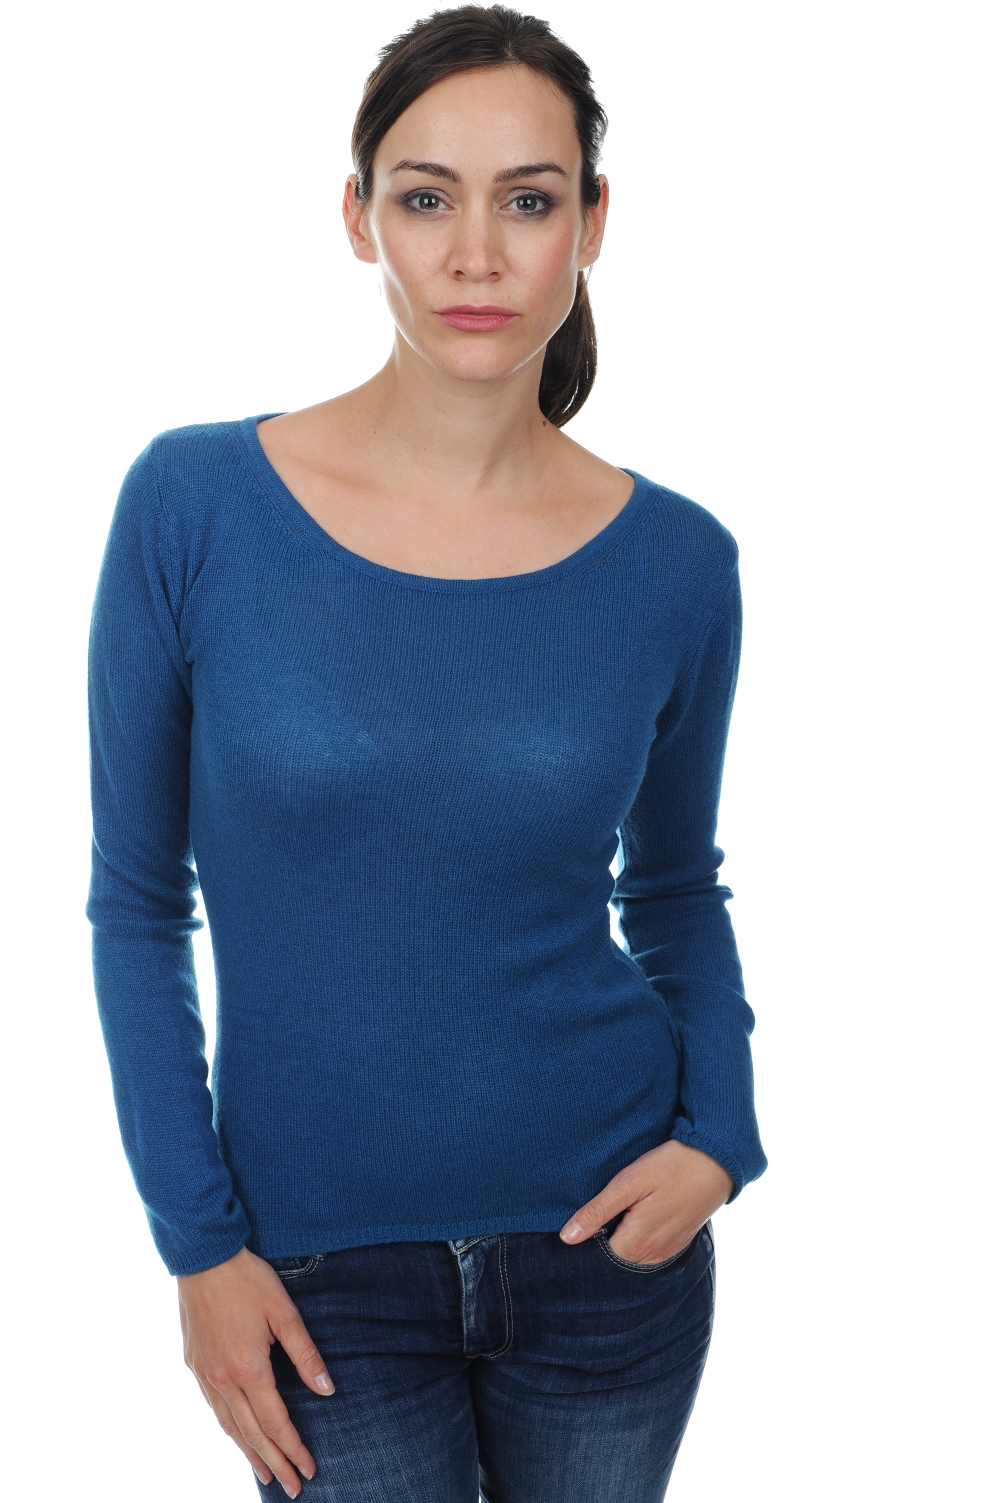 Cashmere ladies basic sweaters at low prices caleen canard blue 2xl